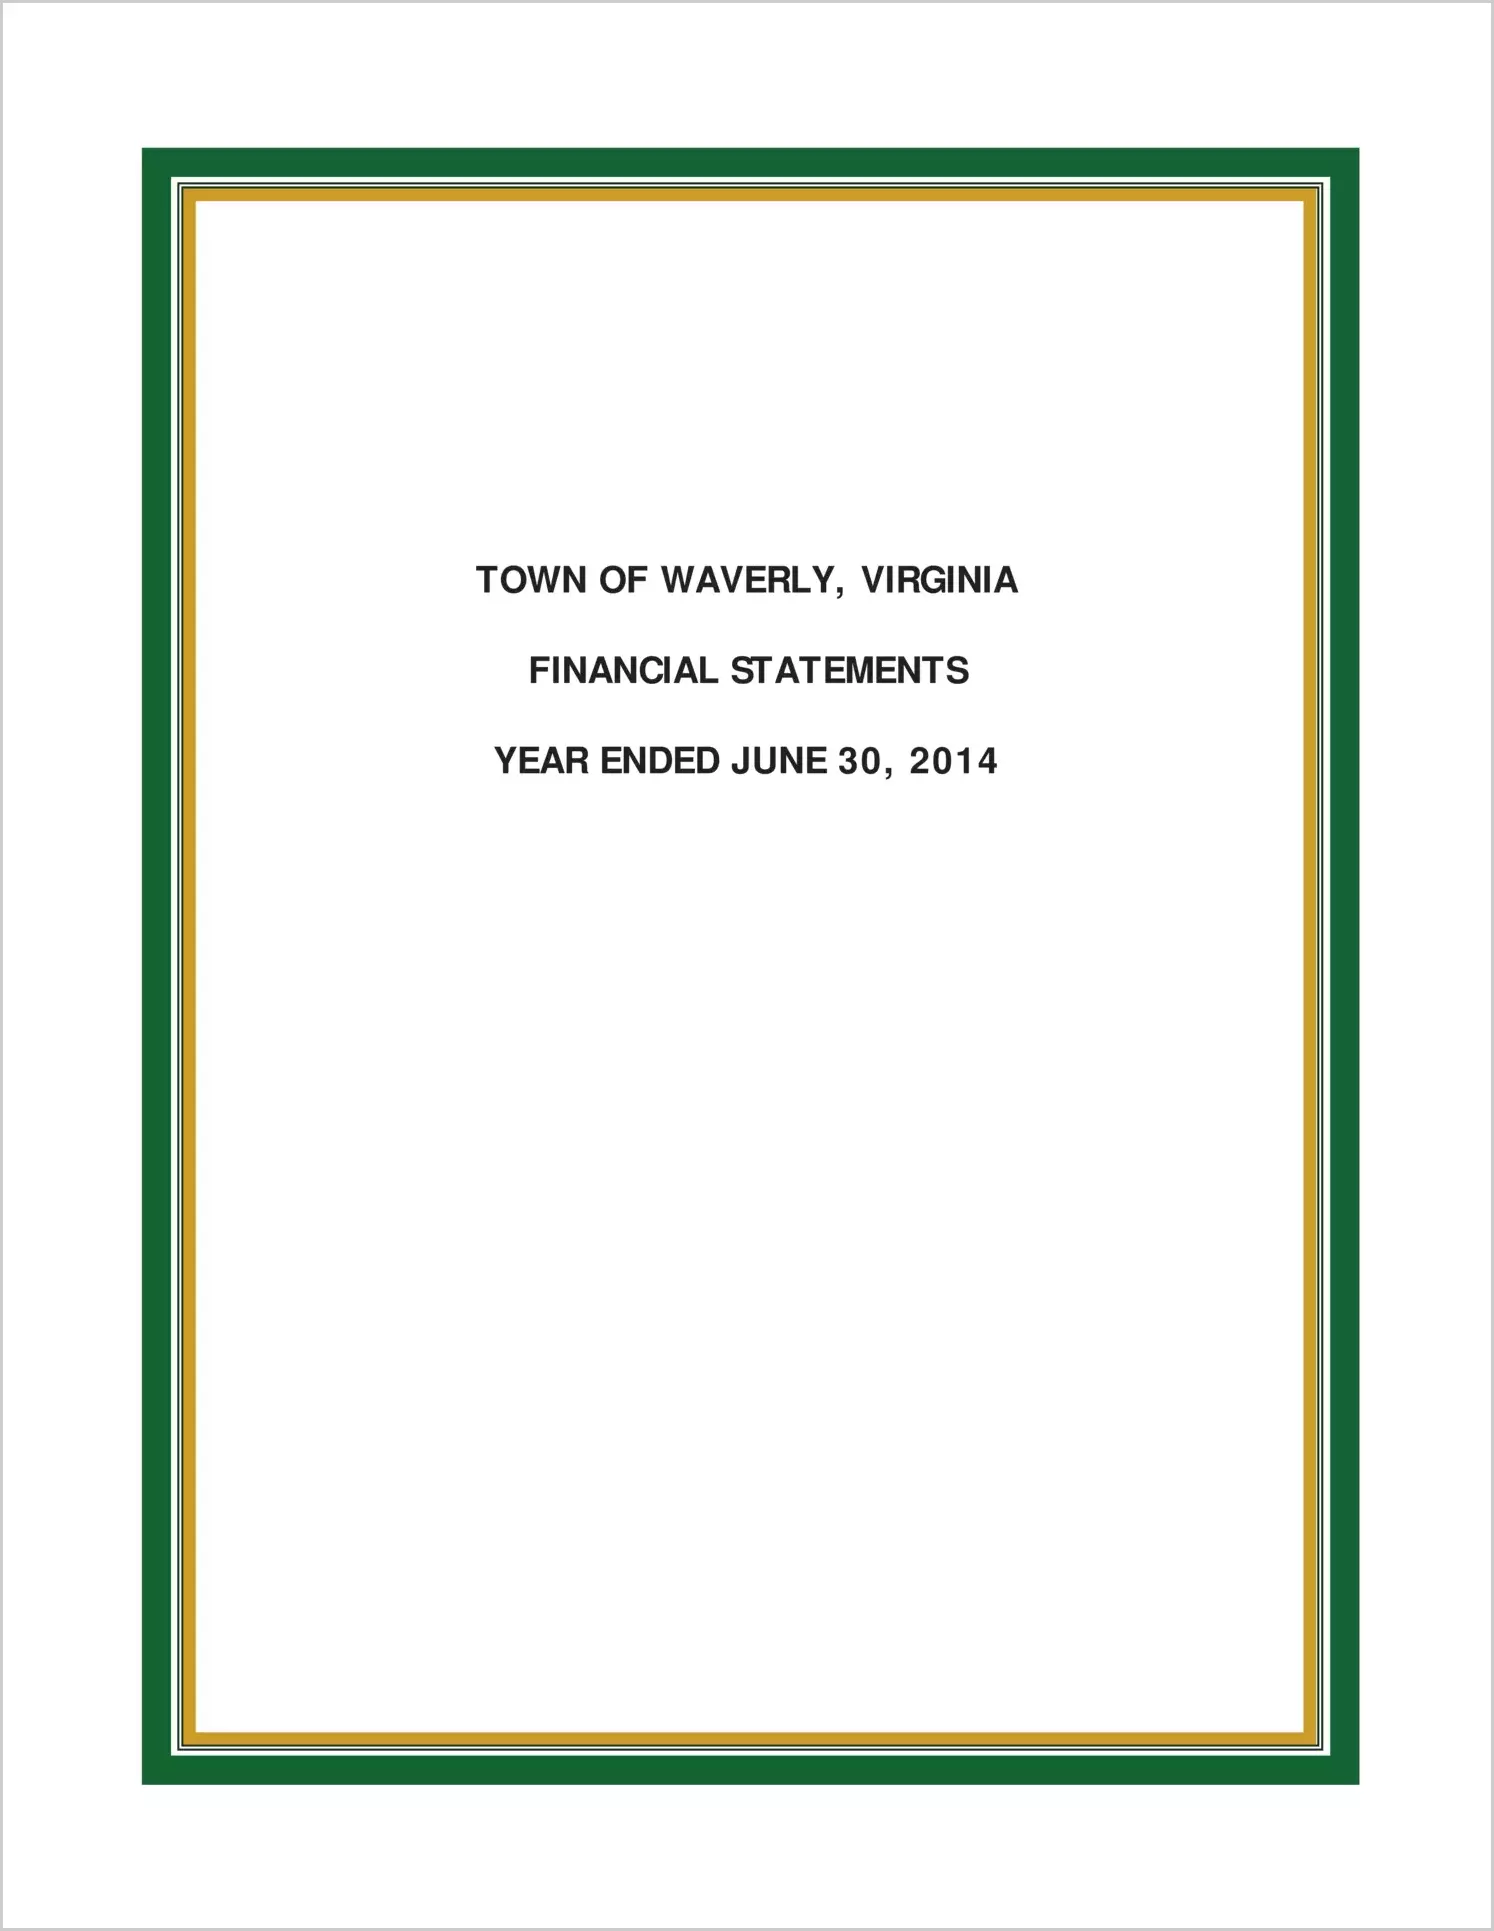 2014 Annual Financial Report for Town of Waverly